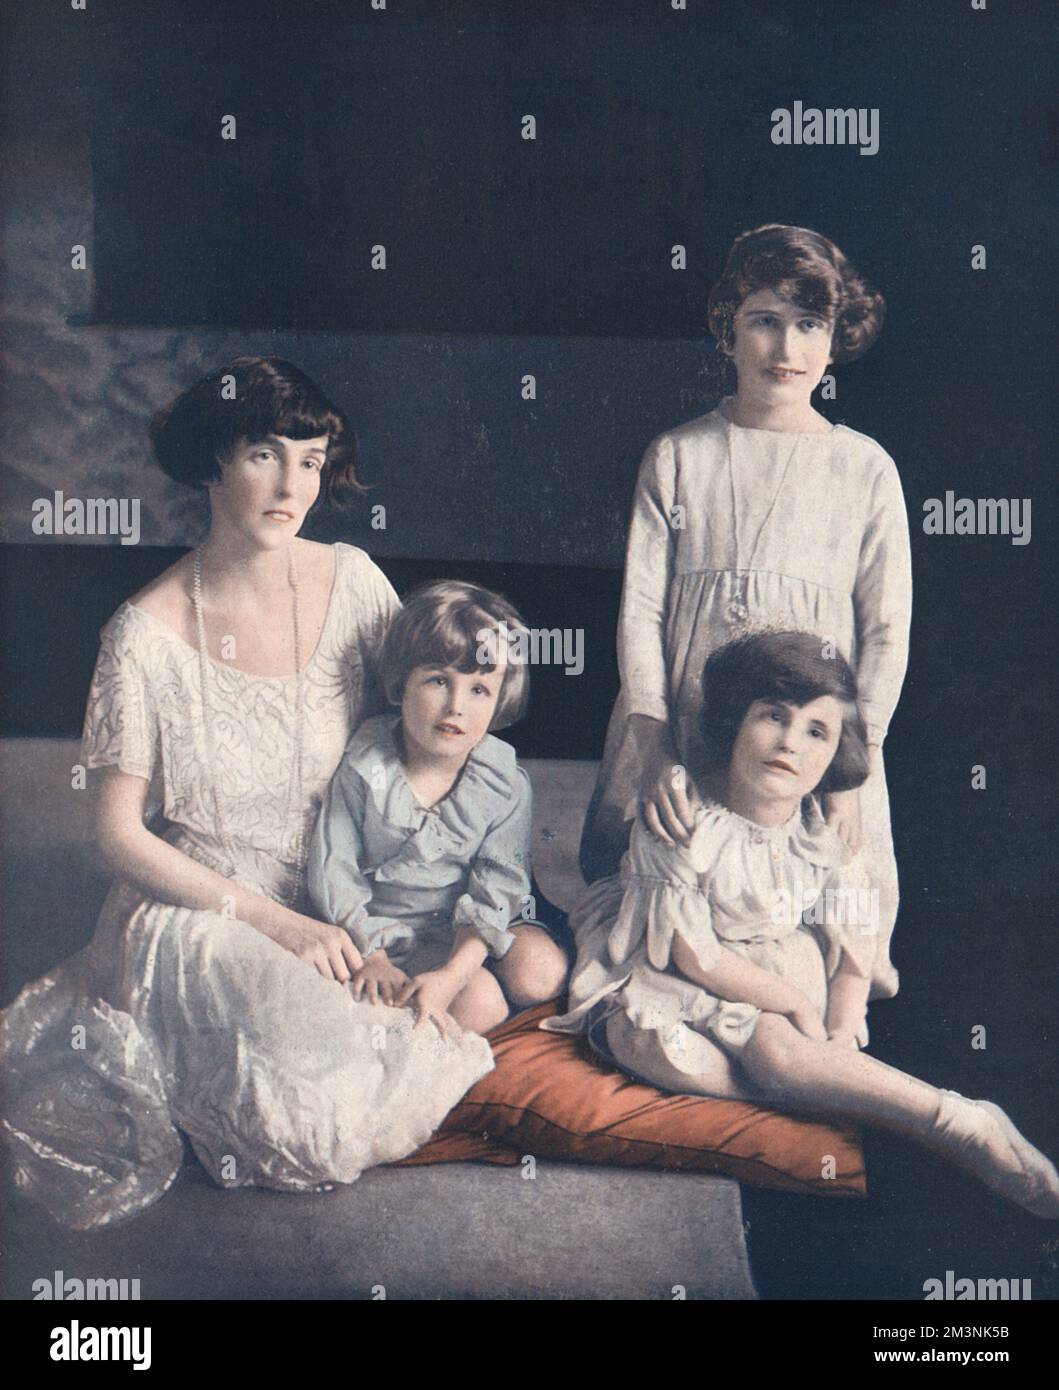 One of the eight bridesmaids at the royal wedding between Prince Albert, Duke of York and Lady Elizabeth Bowes-Lyon at Westminster Abbey on 26 April 1923, the Hon. Cecilia Bowes-Lyon, niece of the bride pictured with her mother, Lady Glamis (daughter of the tenth Duke of Leeds) and her twin brother and sister the Timothy and Nancy.     Date: 1923 Stock Photo